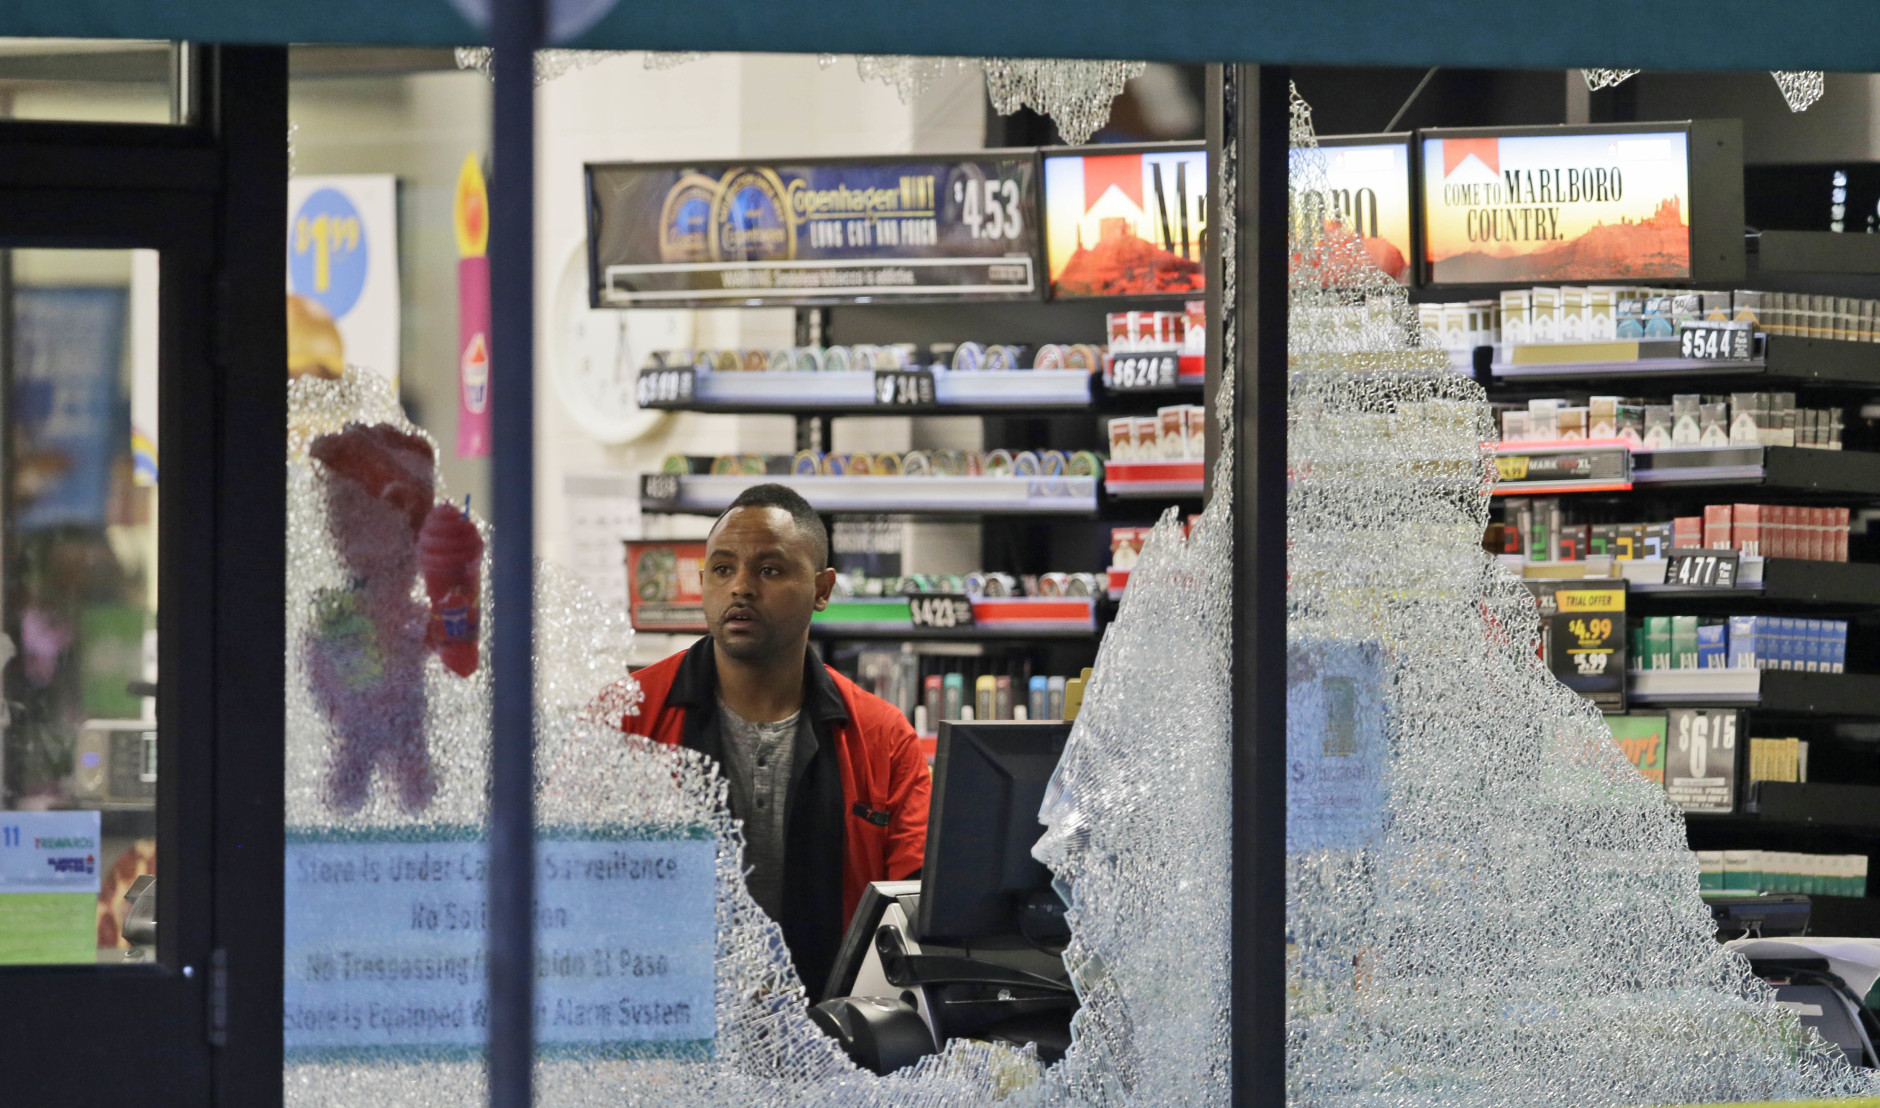 A clerk looks at broke windows shot out at a store in downtown Dallas, Friday, July 8, 2016.  Snipers opened fire on police officers in the heart of Dallas during protests over two recent fatal police shootings of black men.(AP Photo/LM Otero)